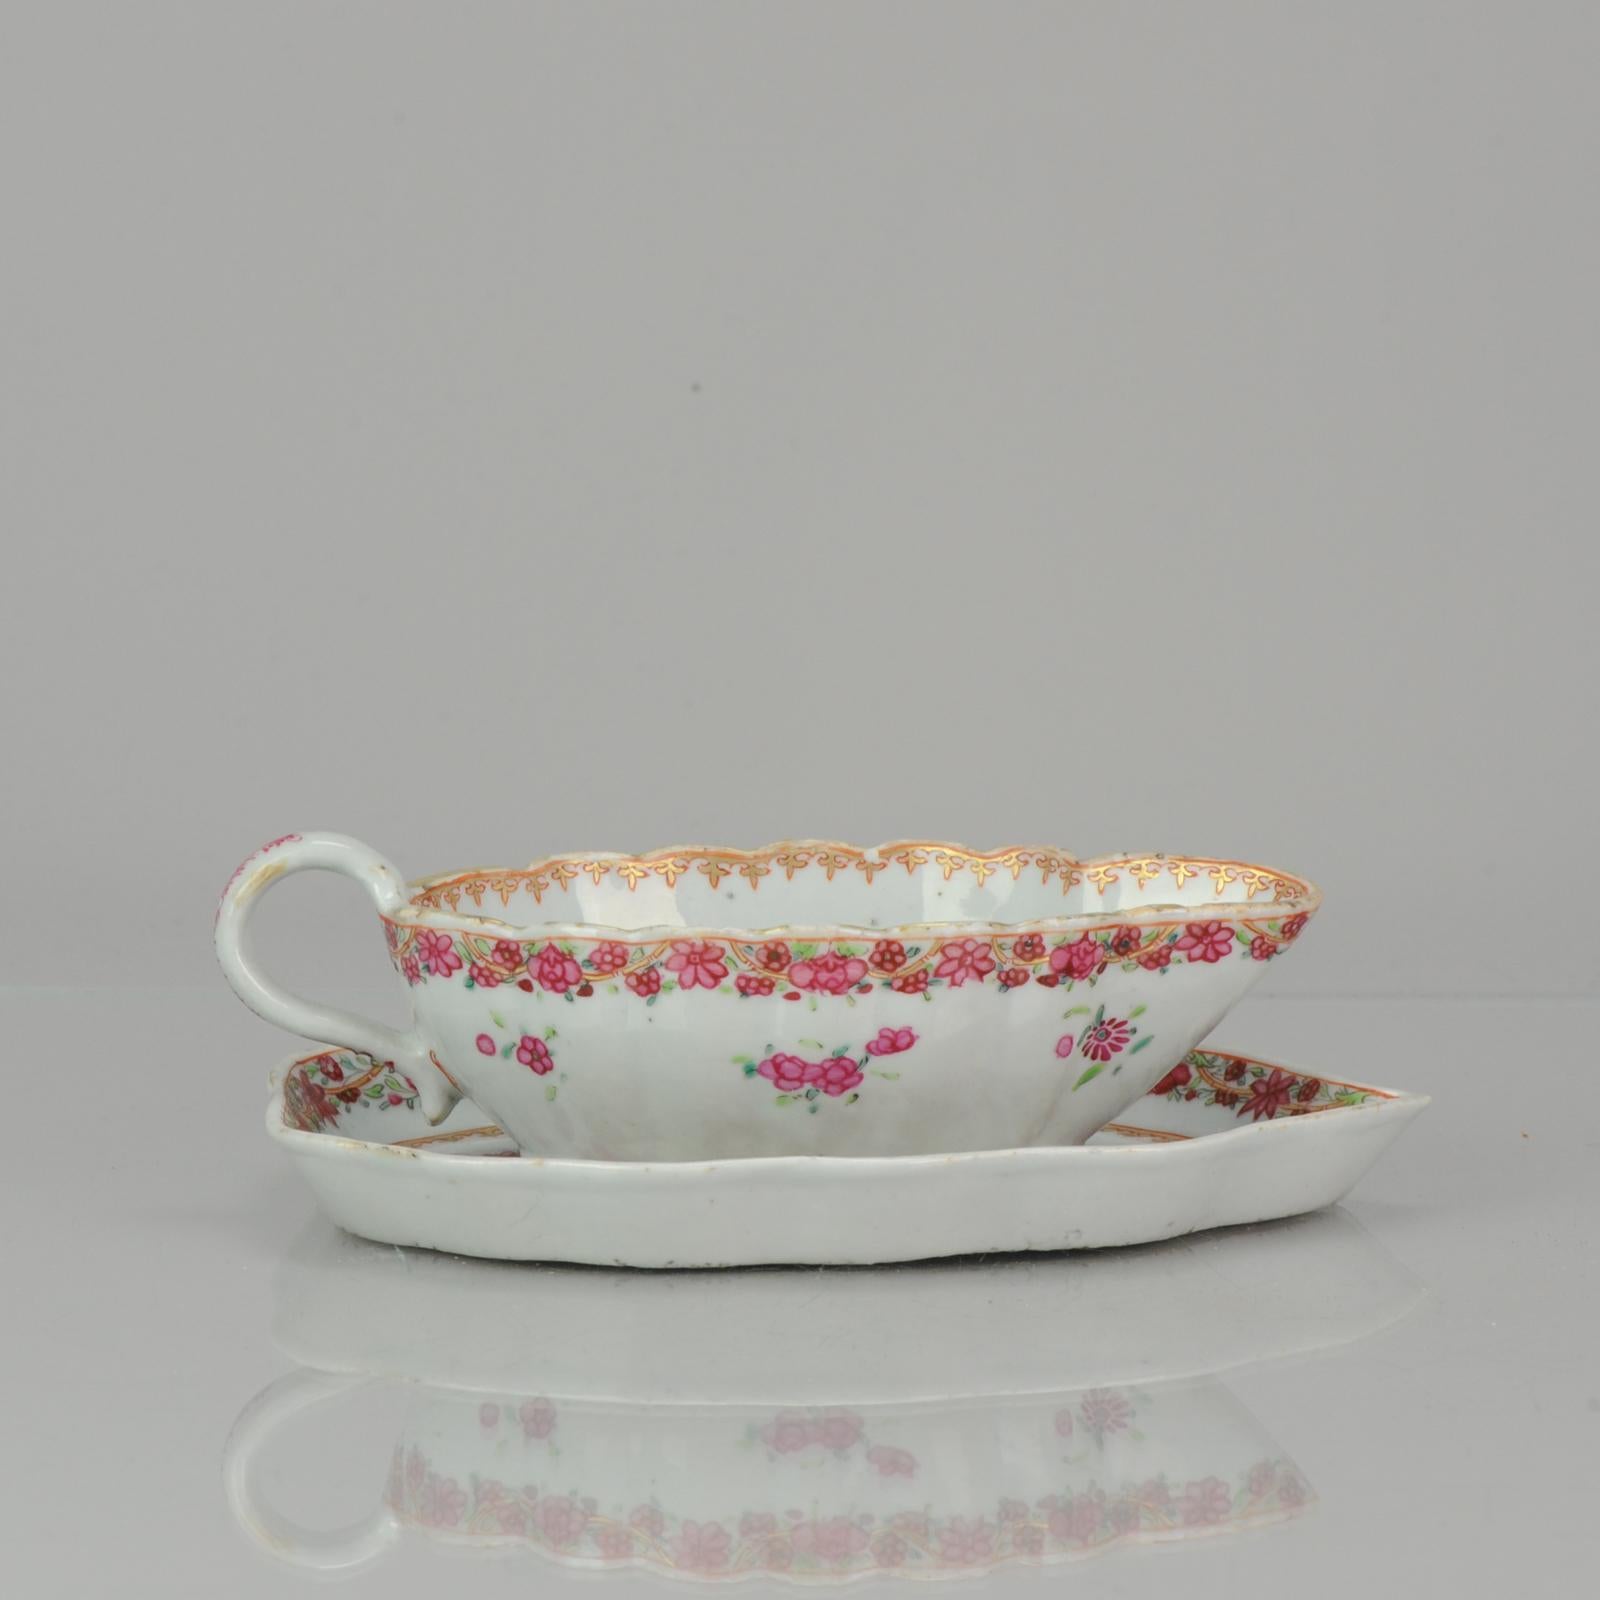 A very nicely decorated sauce boat With matching undertray.

Decorated with a floral scene

This very Rococo design was very popular in the middle of the 18th century.

Additional information:
Material: Porcelain & Pottery
Region of Origin: